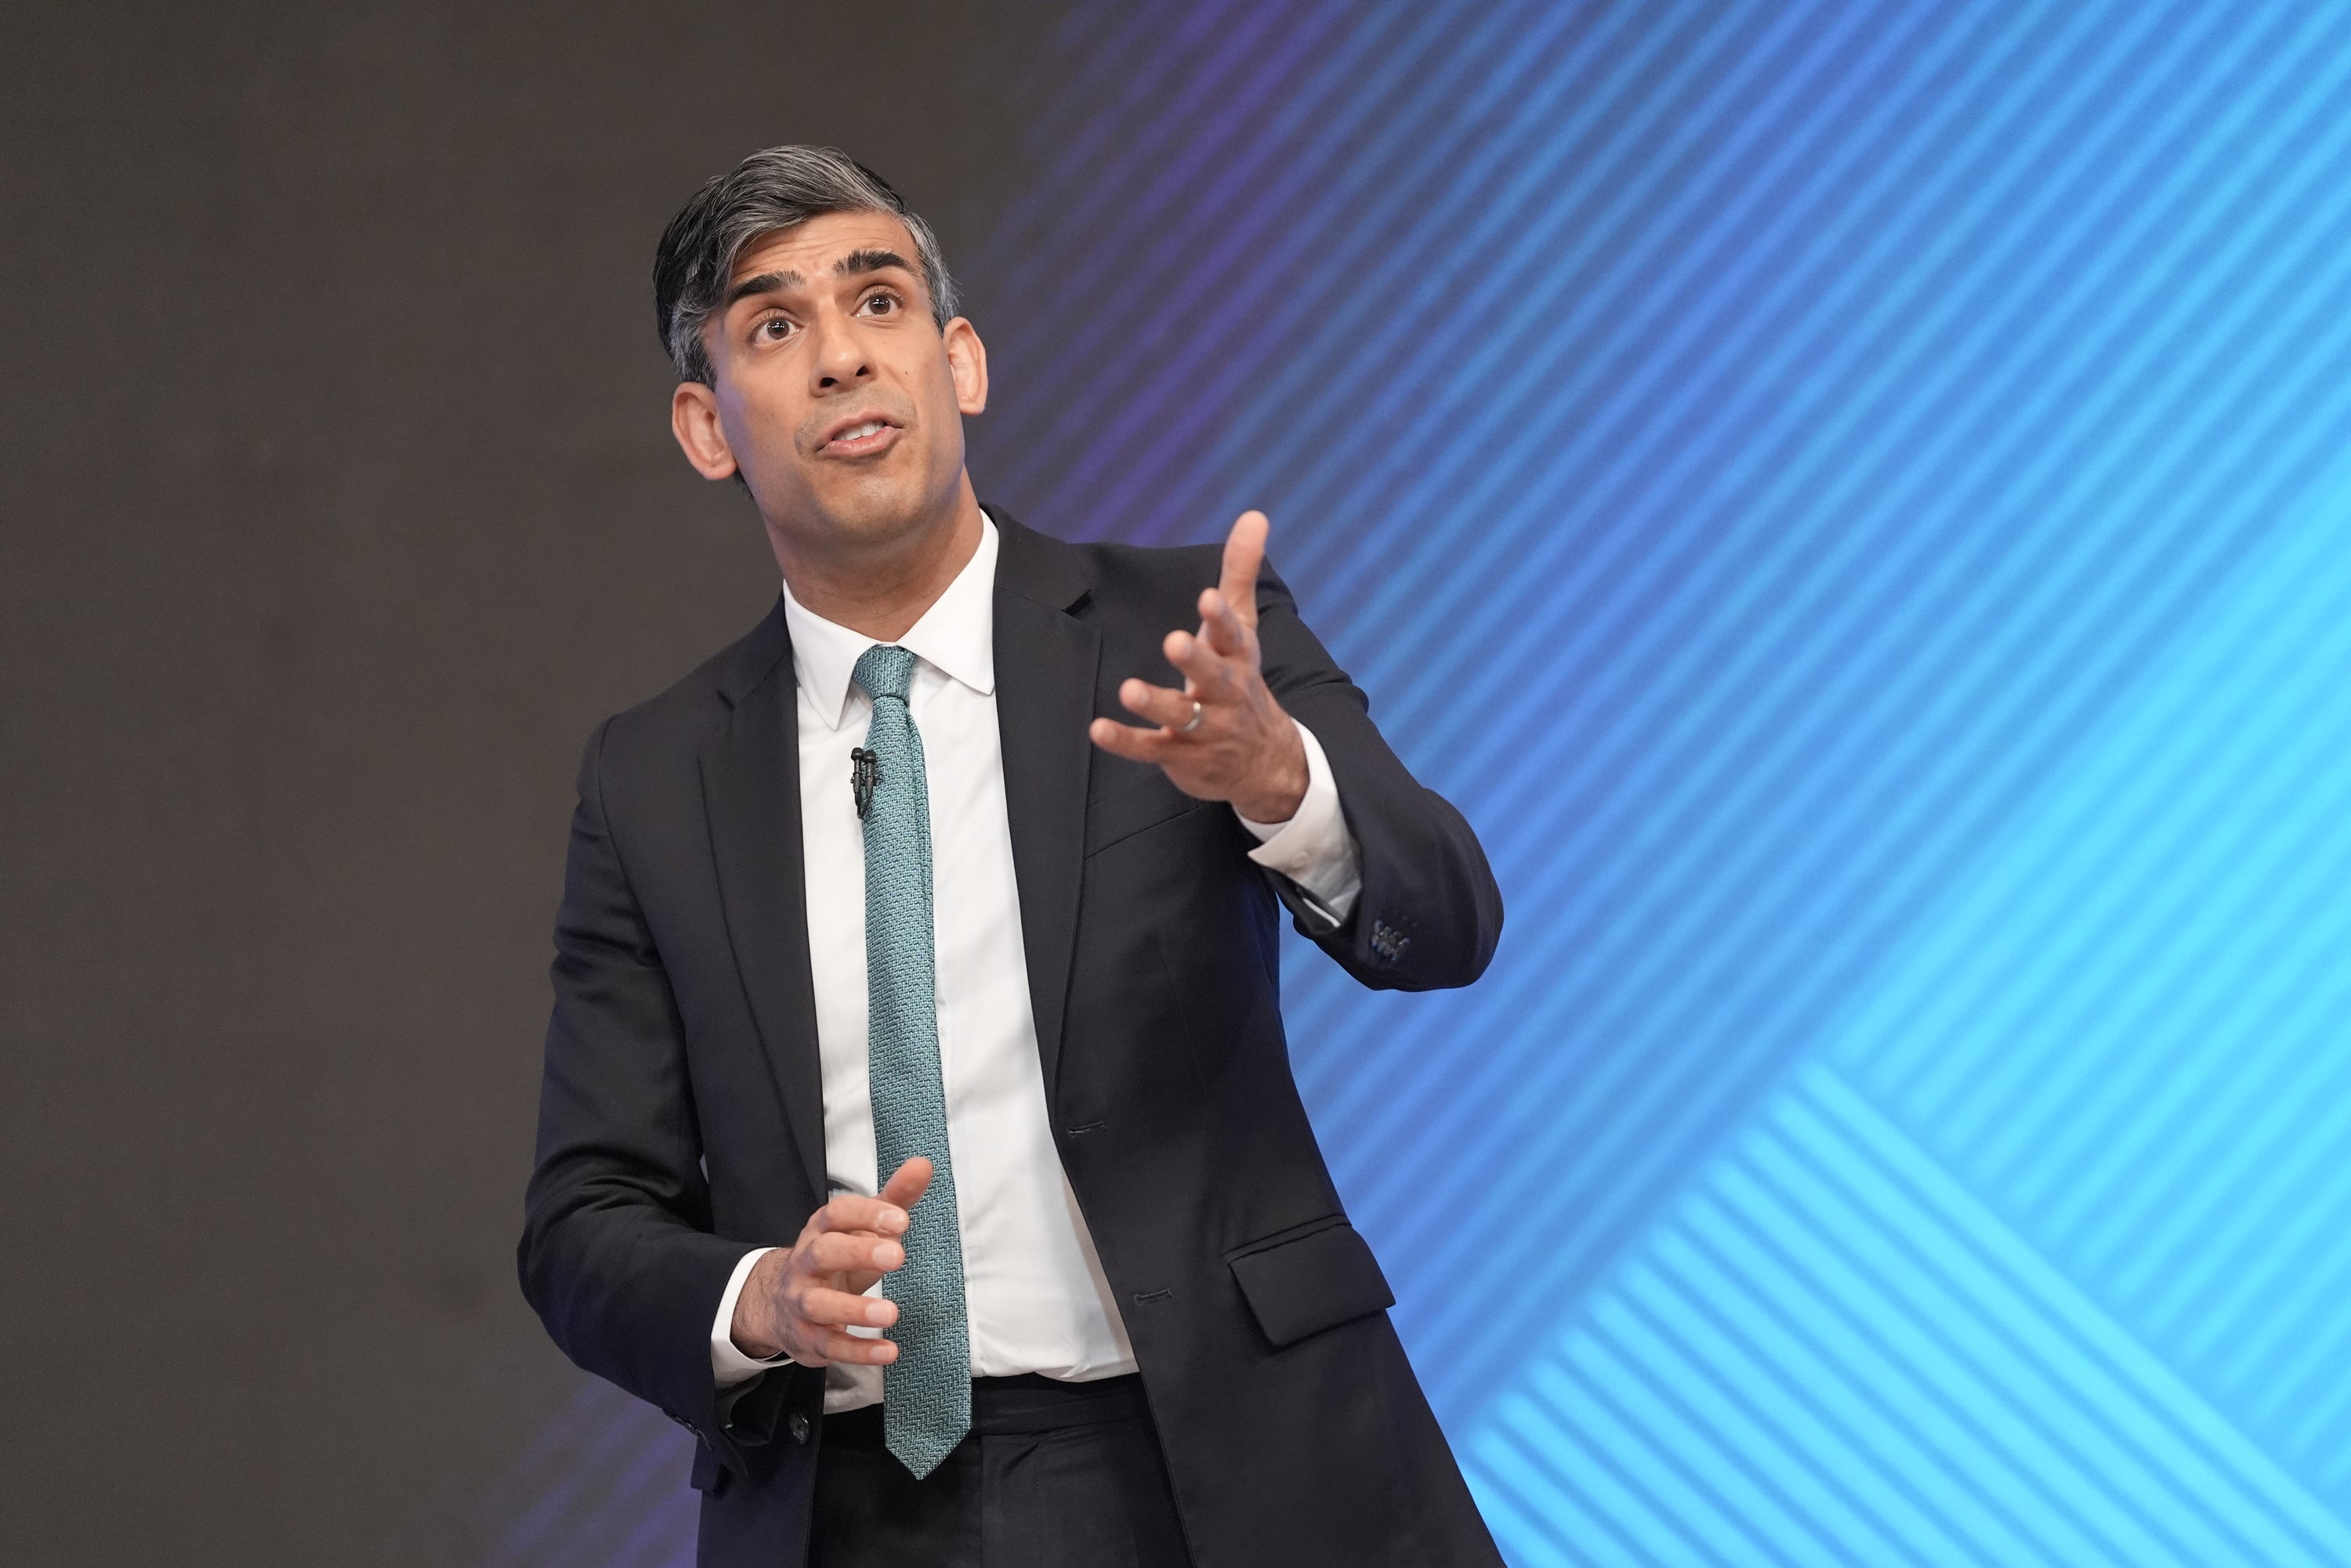 Prime Minister Rishi Sunak, addresses the audience during a Sky News election event